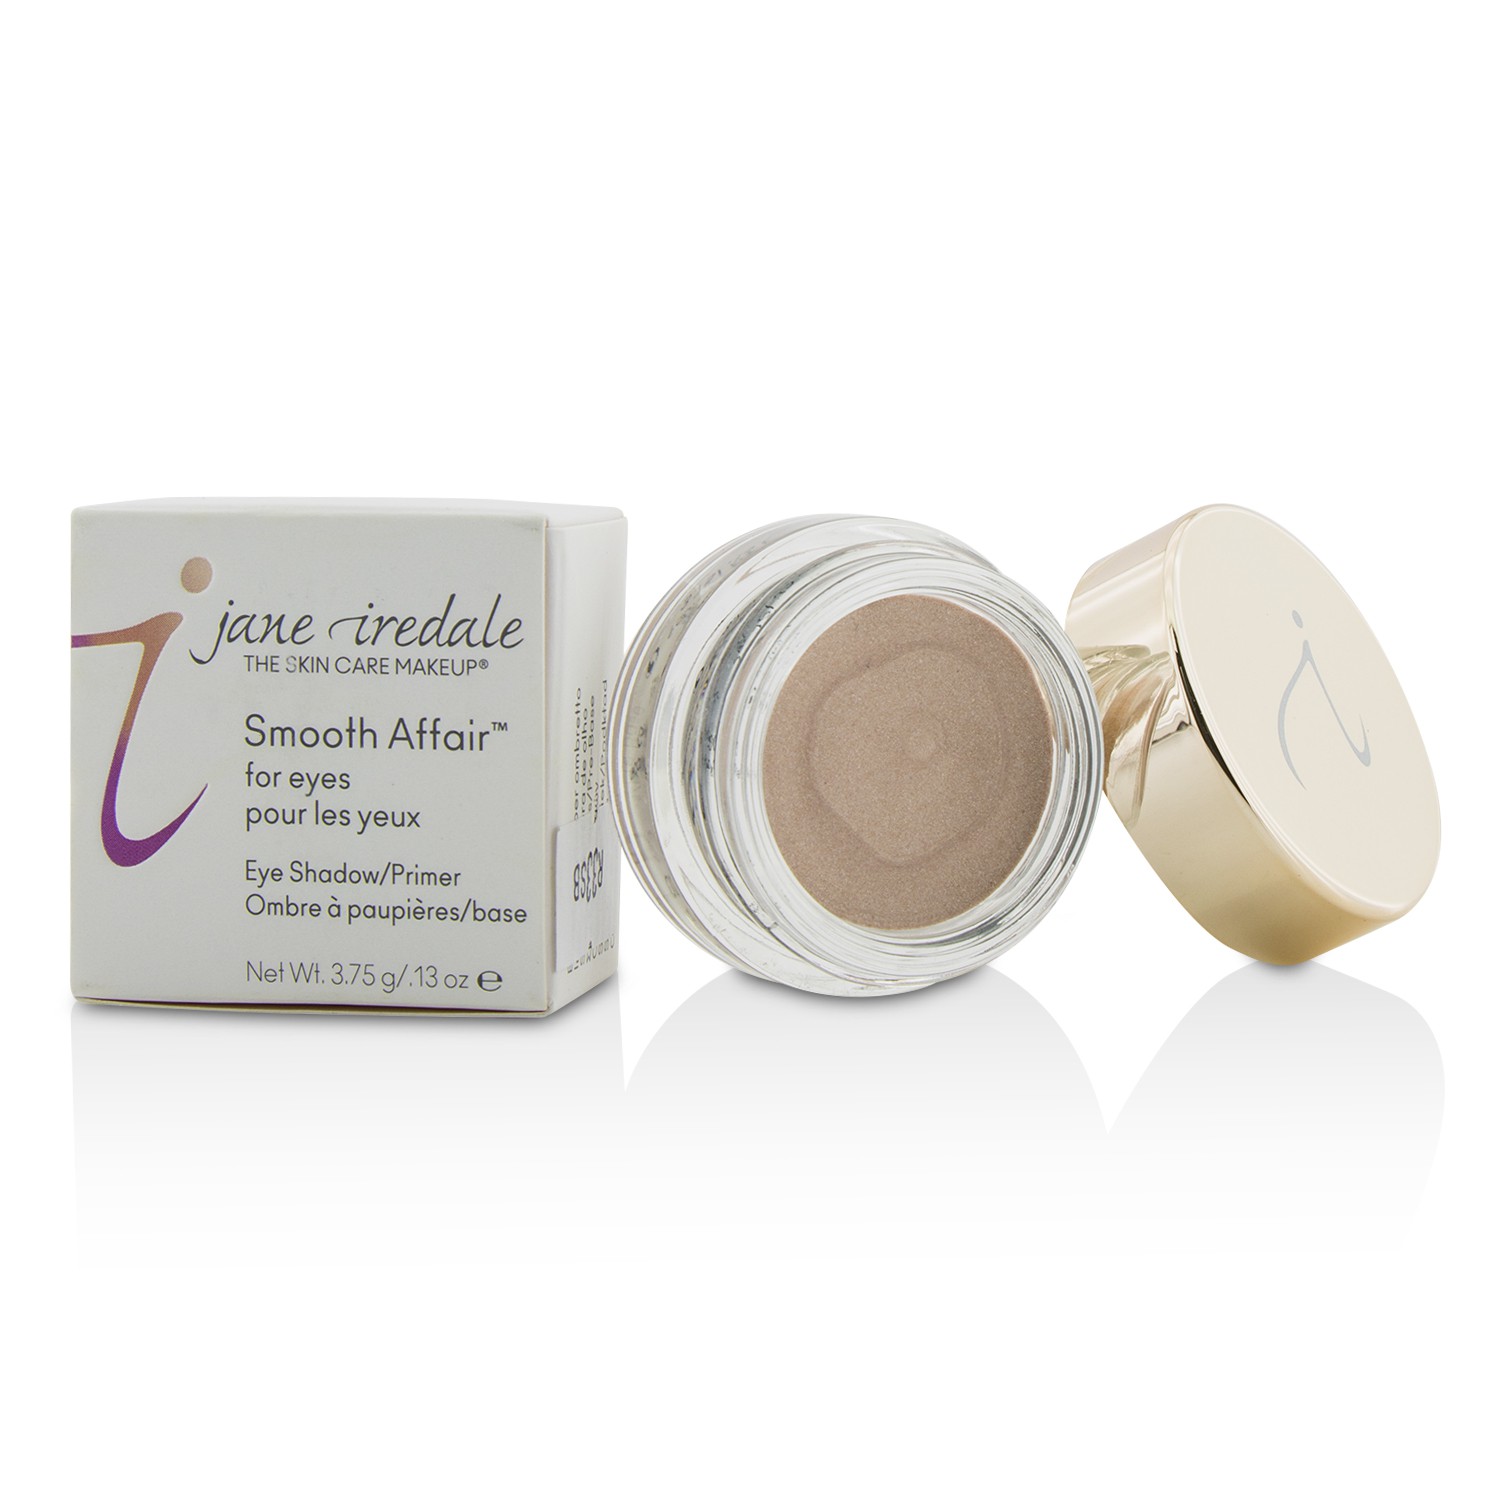 Smooth Affair For Eyes (Eye Shadow/Primer) - Naked Jane Iredale Image